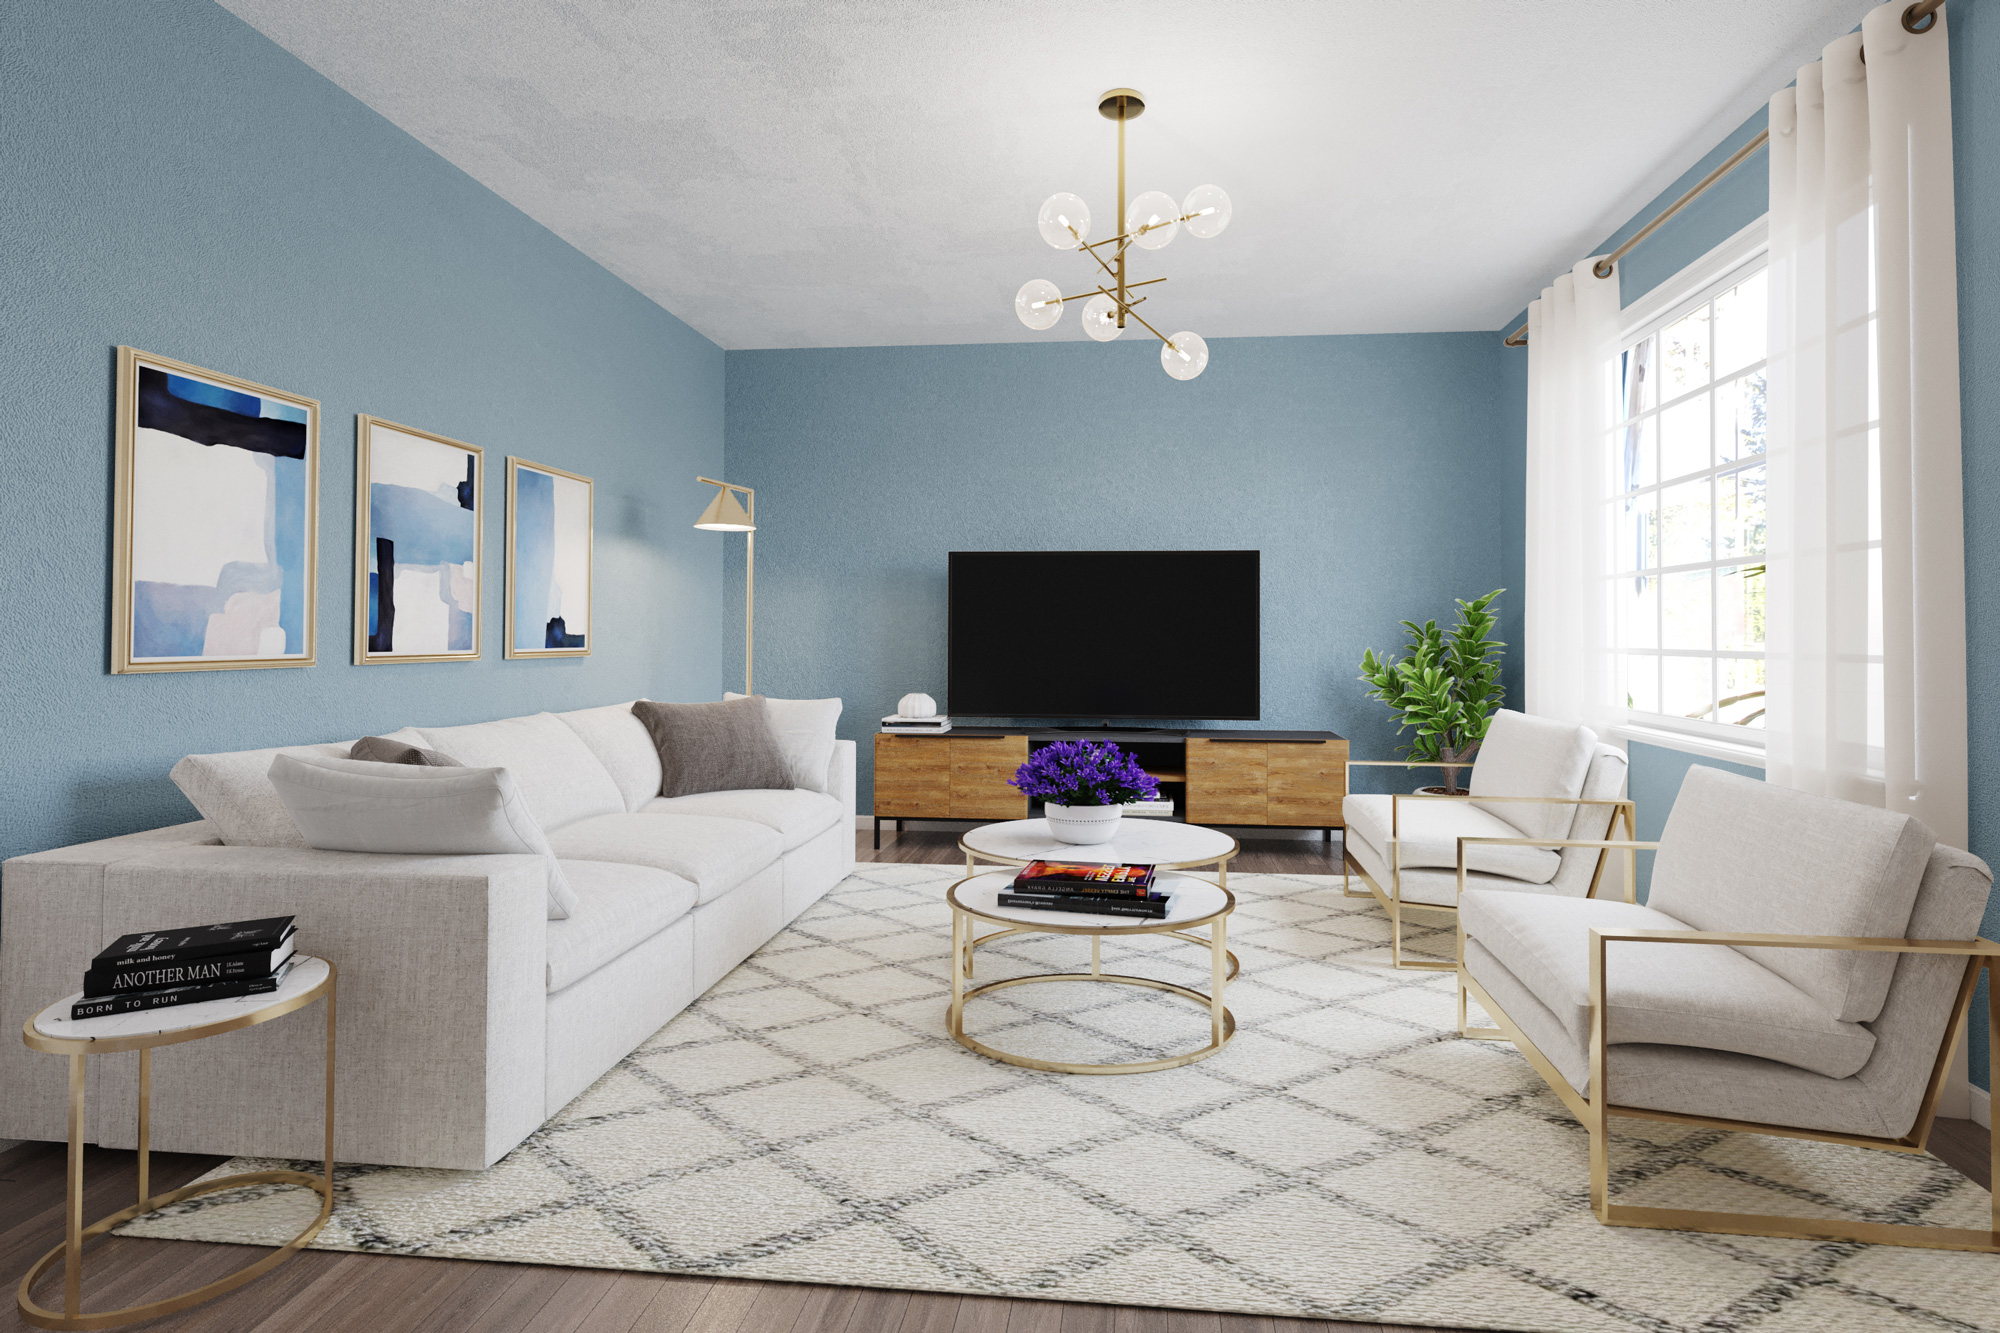 Old beige living room transformed with powder blue walls